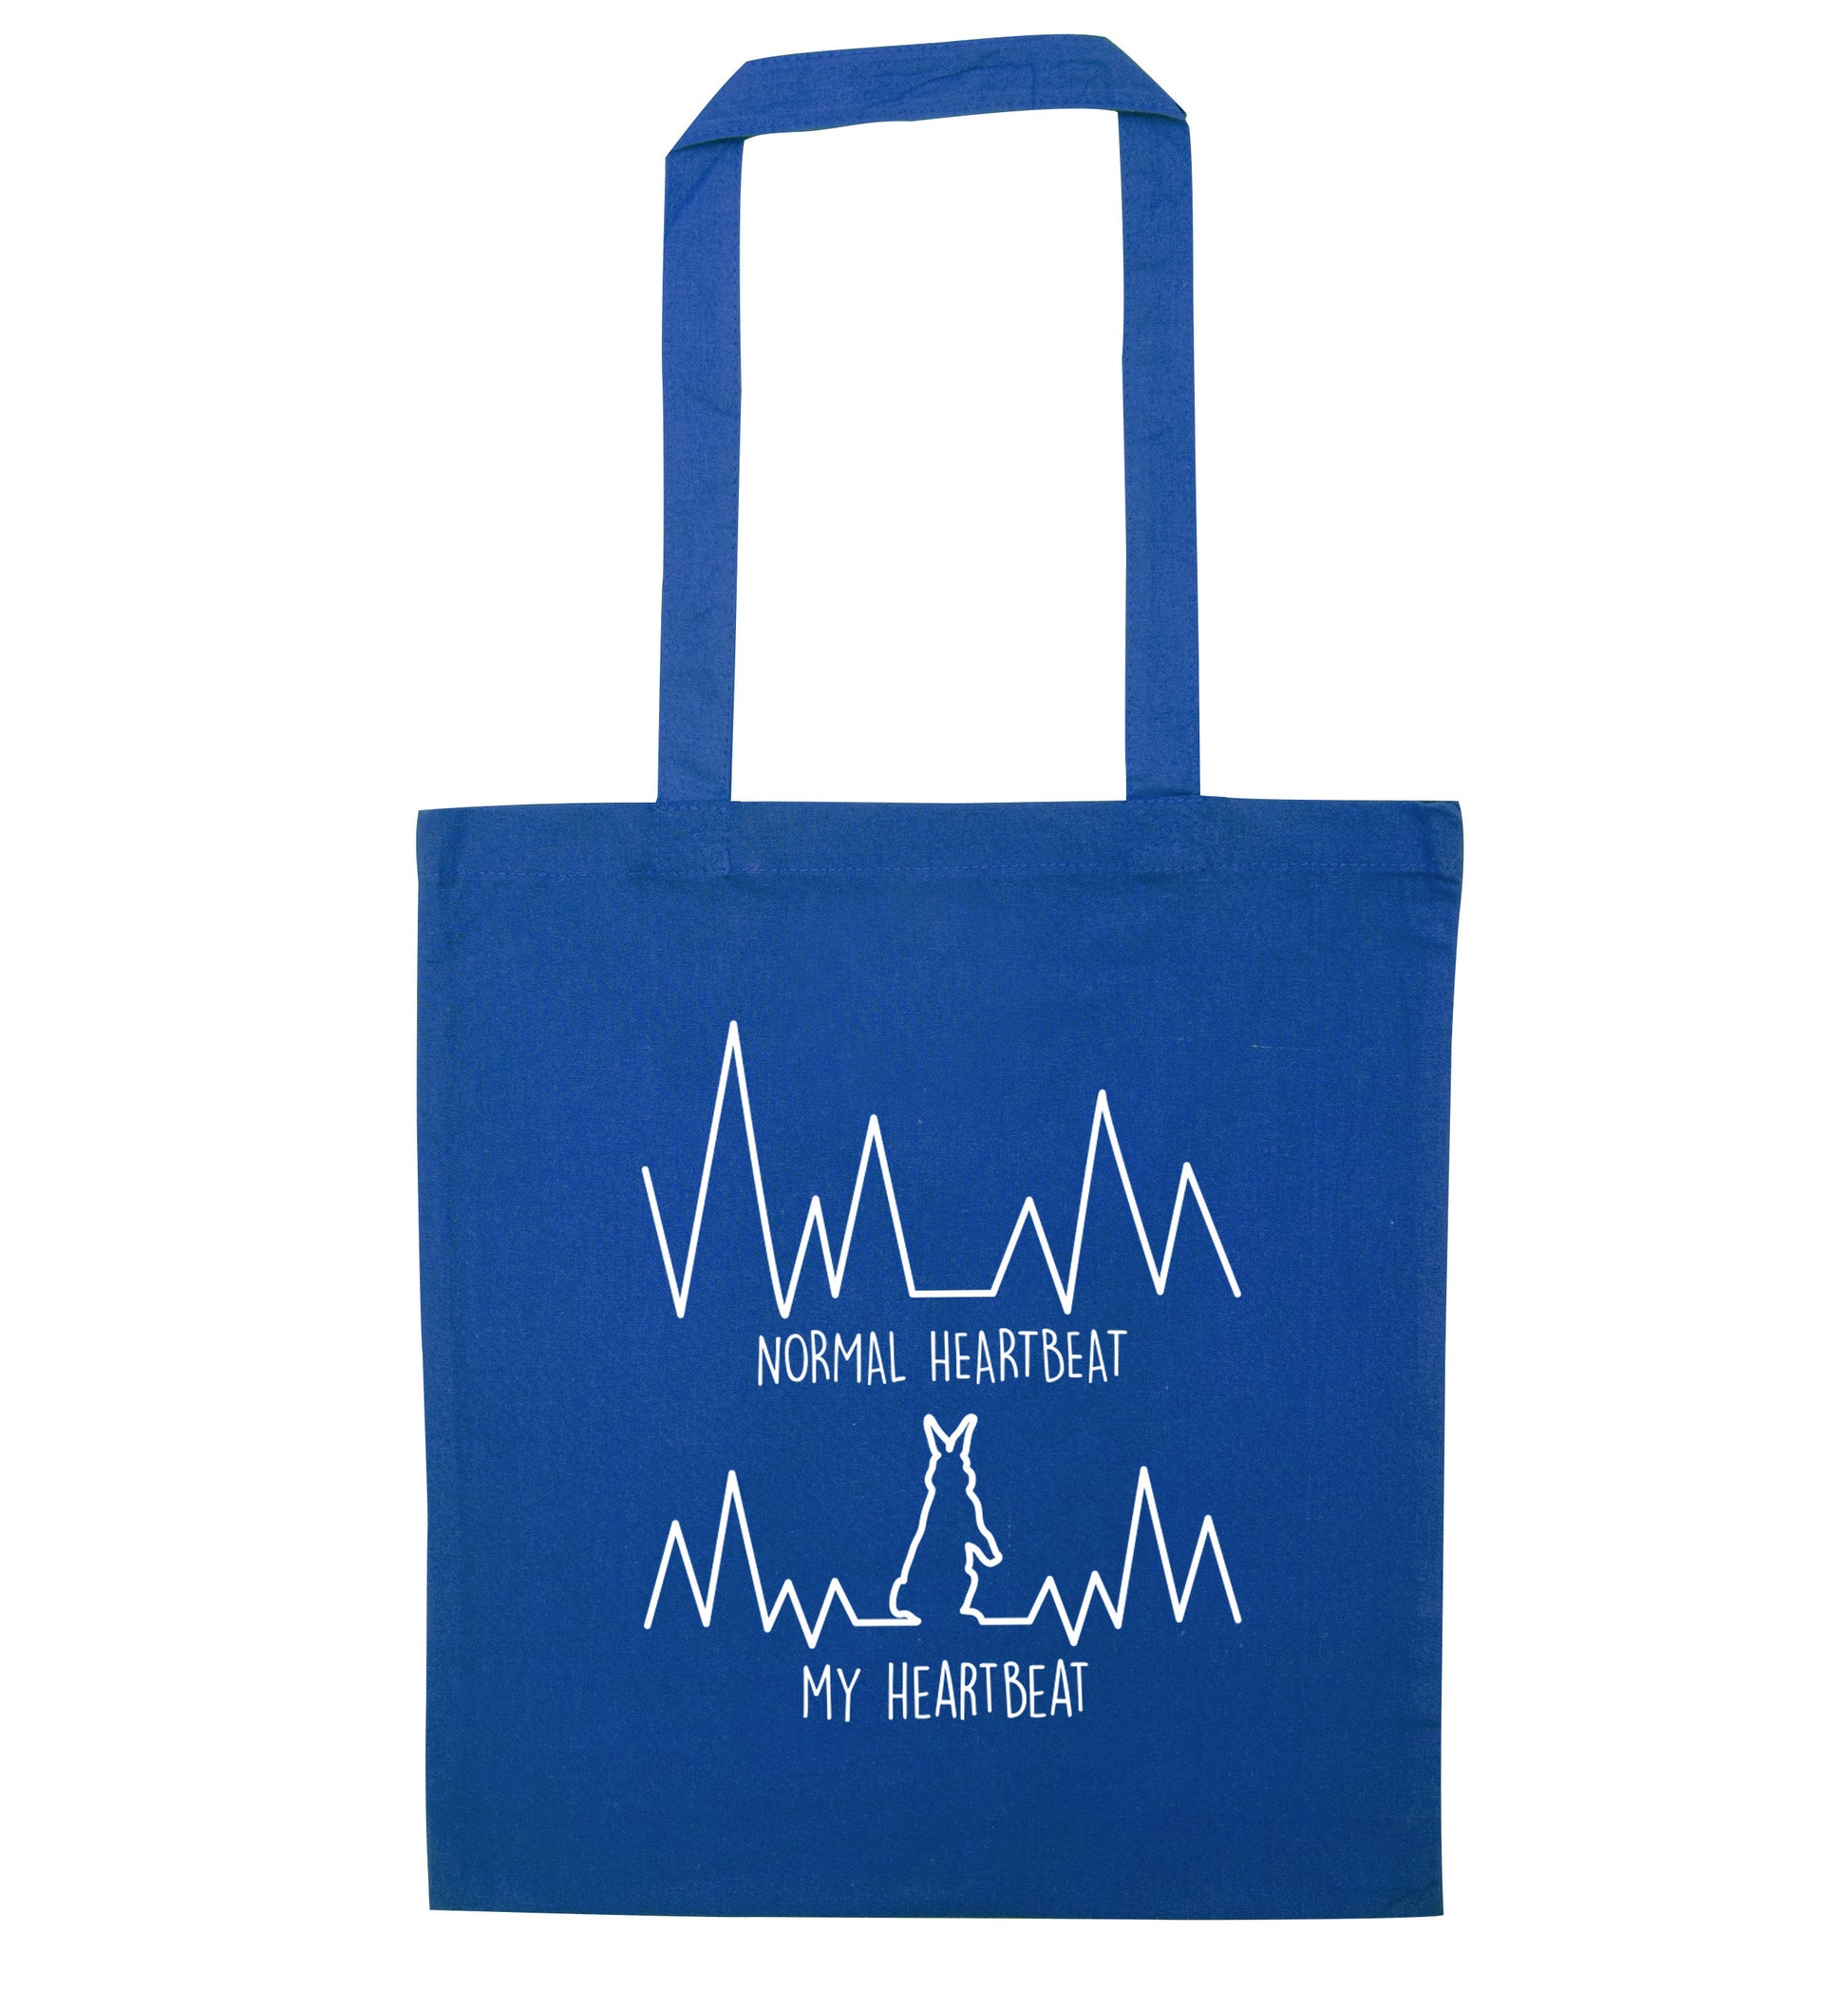 Normal heartbeat, my heartbeat rabbit lover blue tote bag